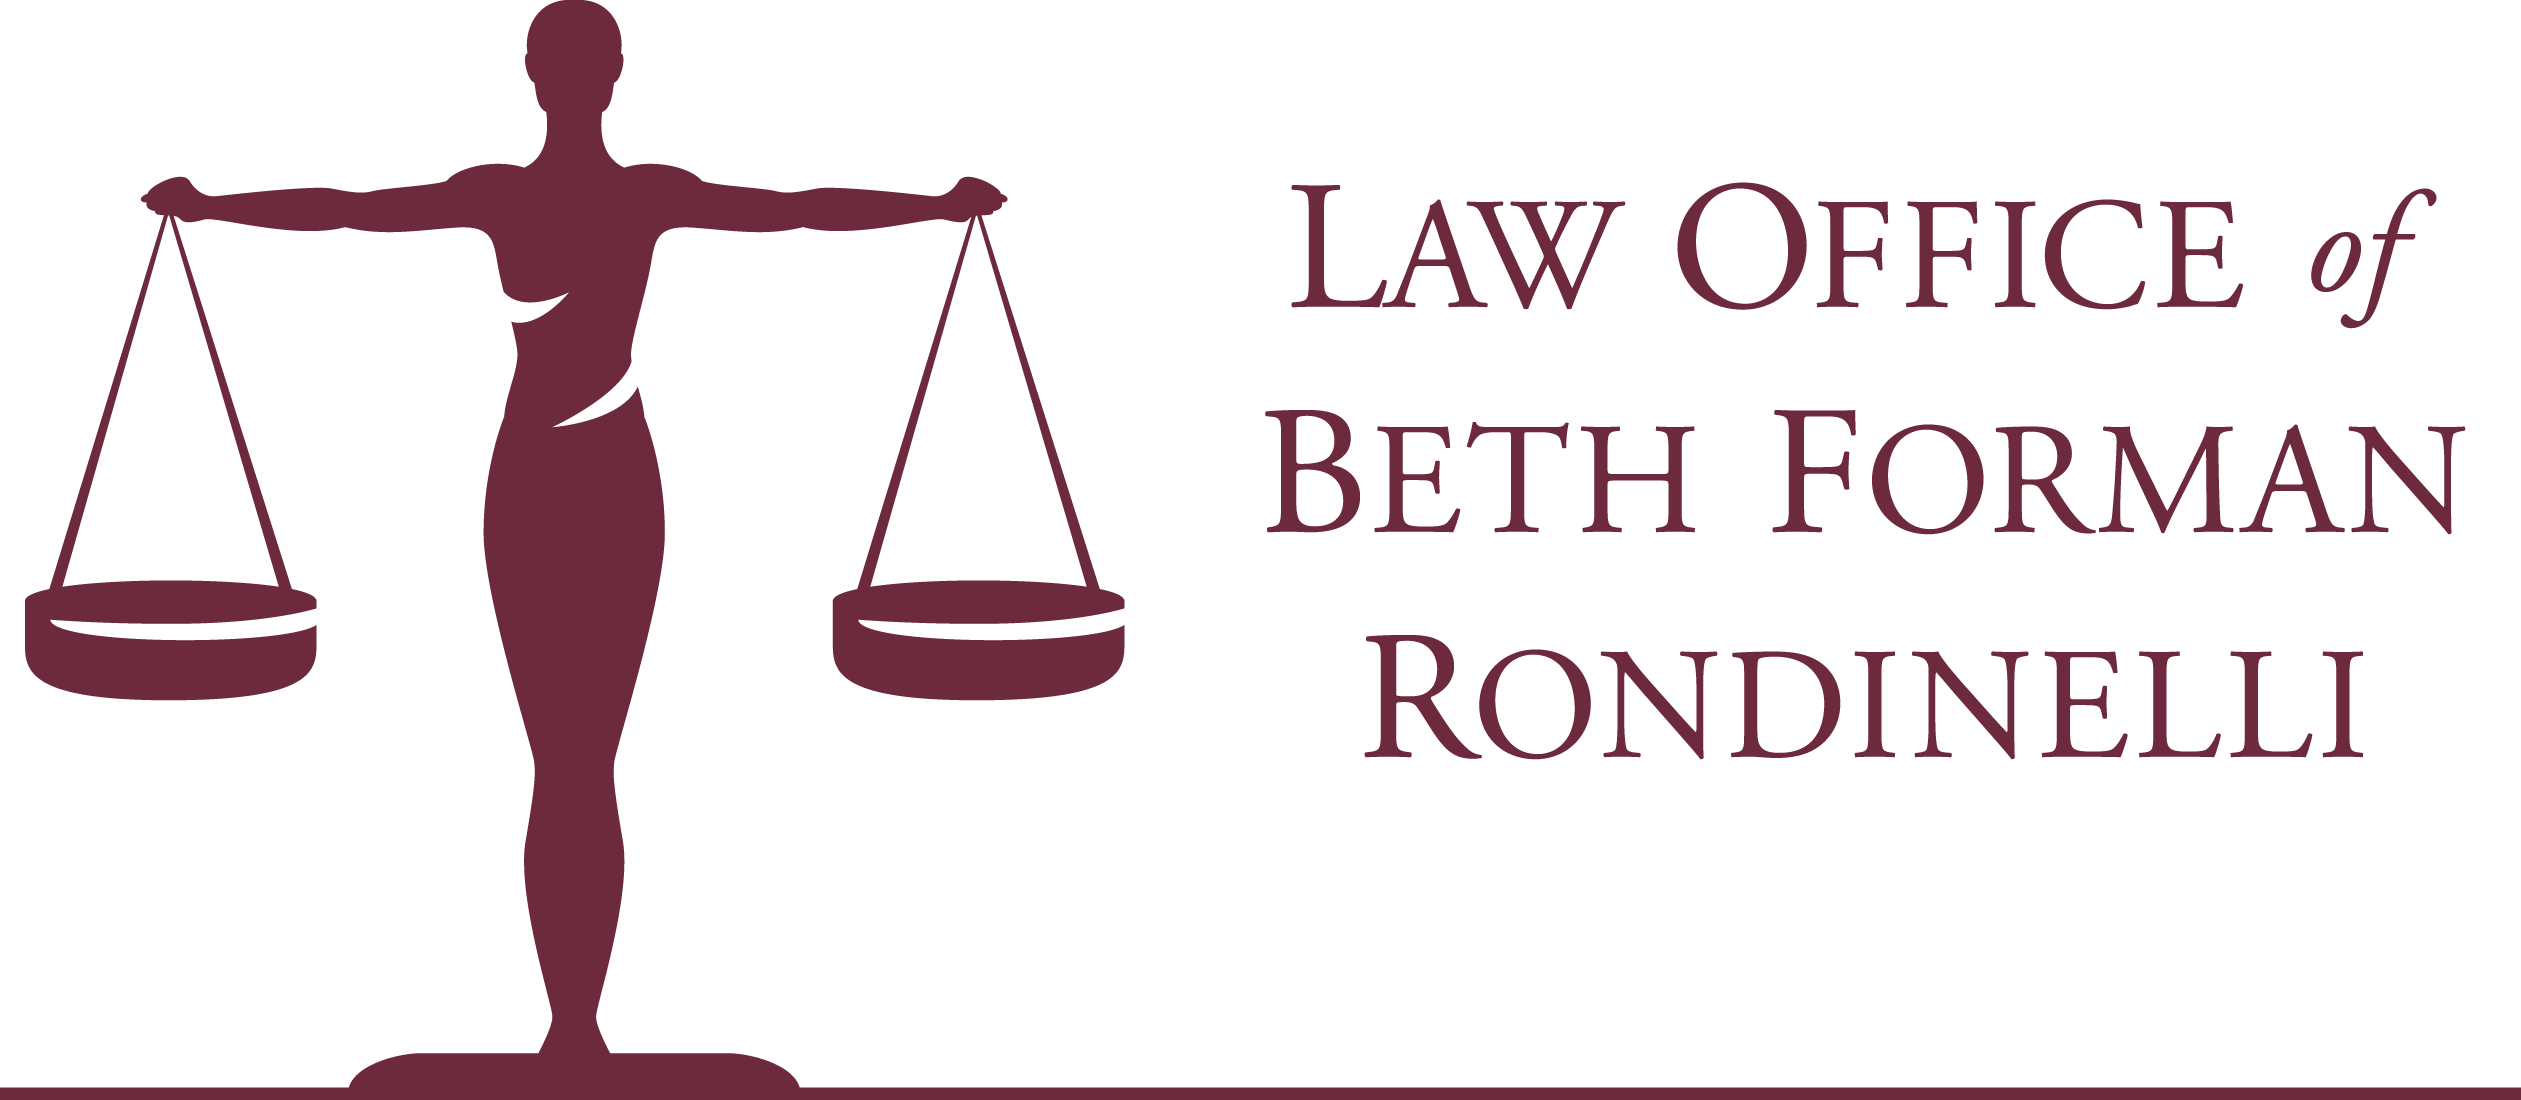 Pennsylvania Affordable Wills, Trusts, Powers of Attorney, and other Estate Planning Documents - Rondinelli Law Firm Estates Attorney